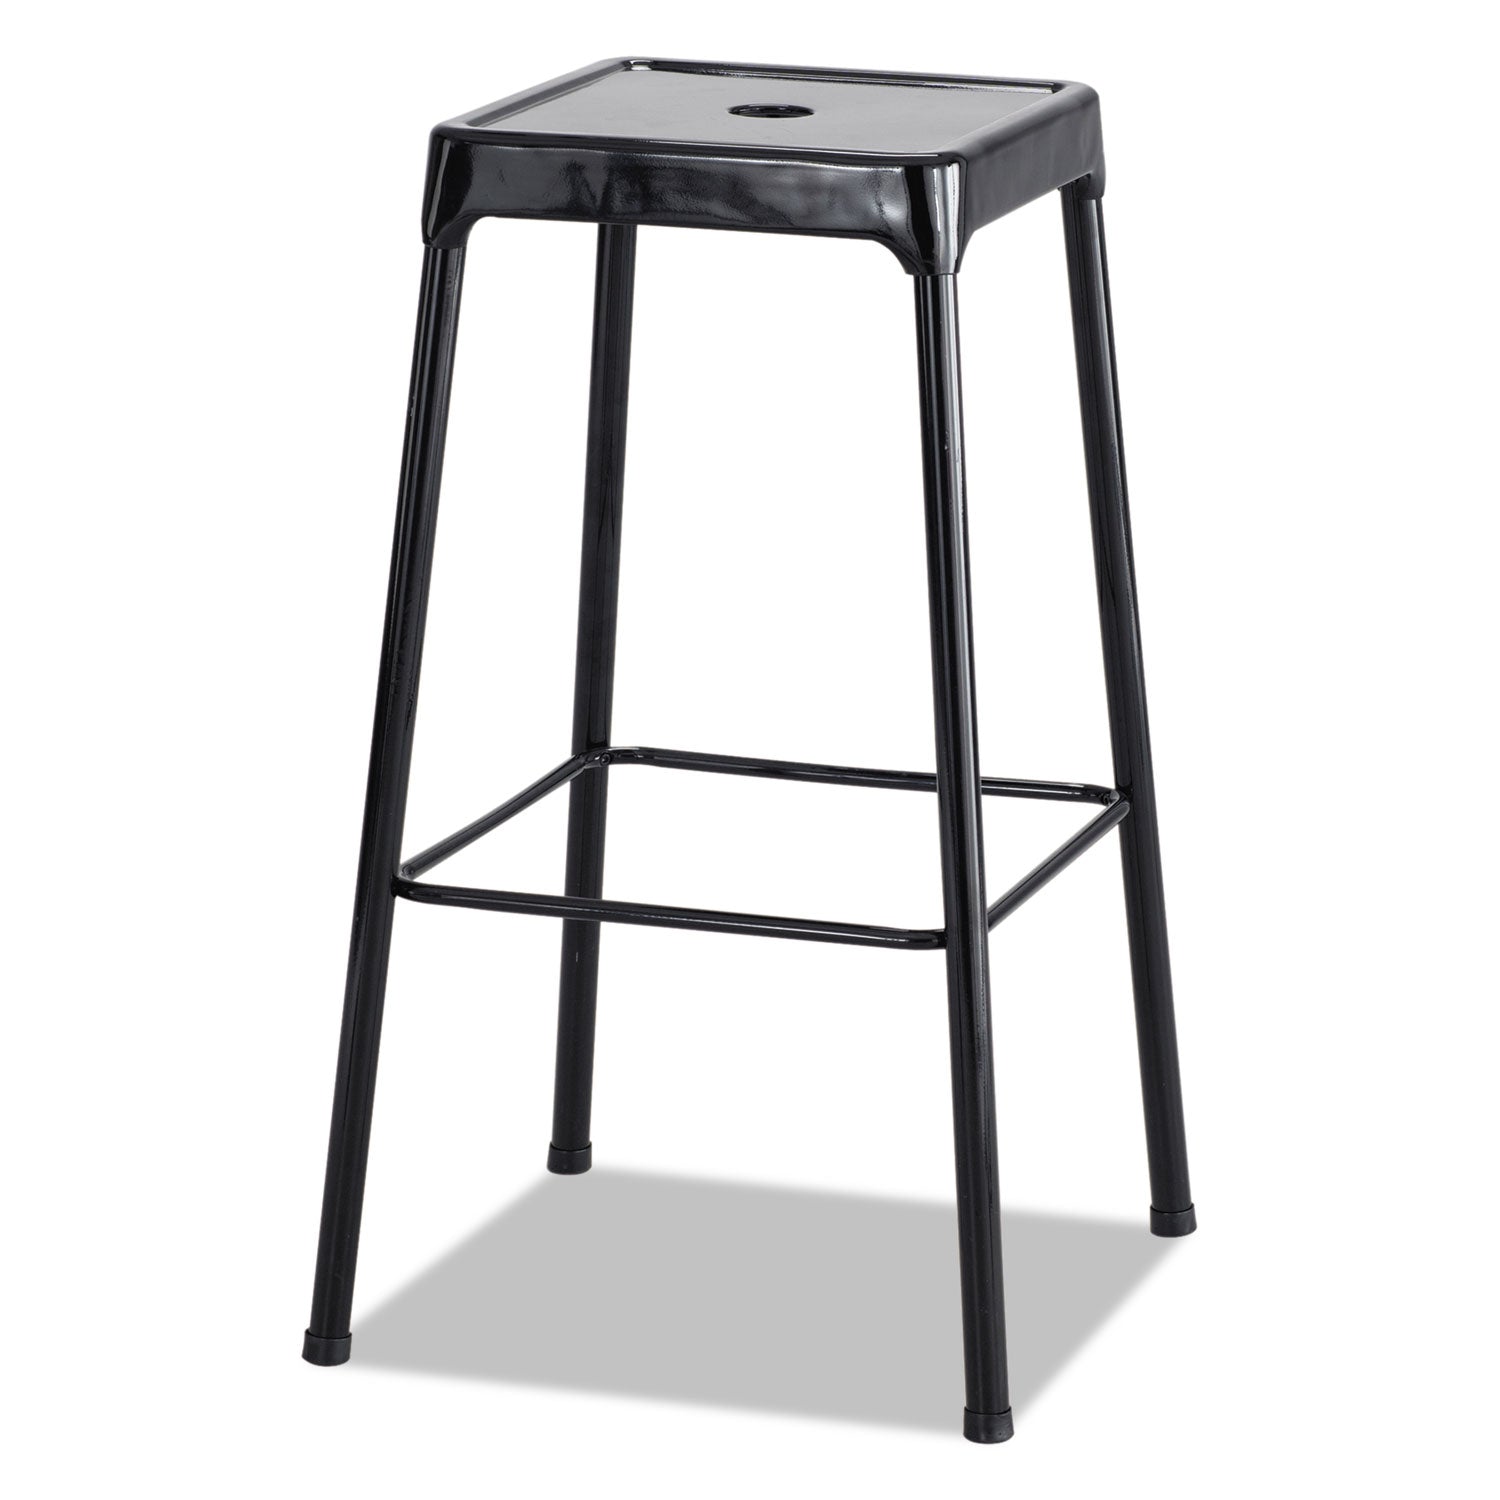 Bar-Height Steel Stool, Backless, Supports Up to 250 lb, 29" Seat Height, Black - 